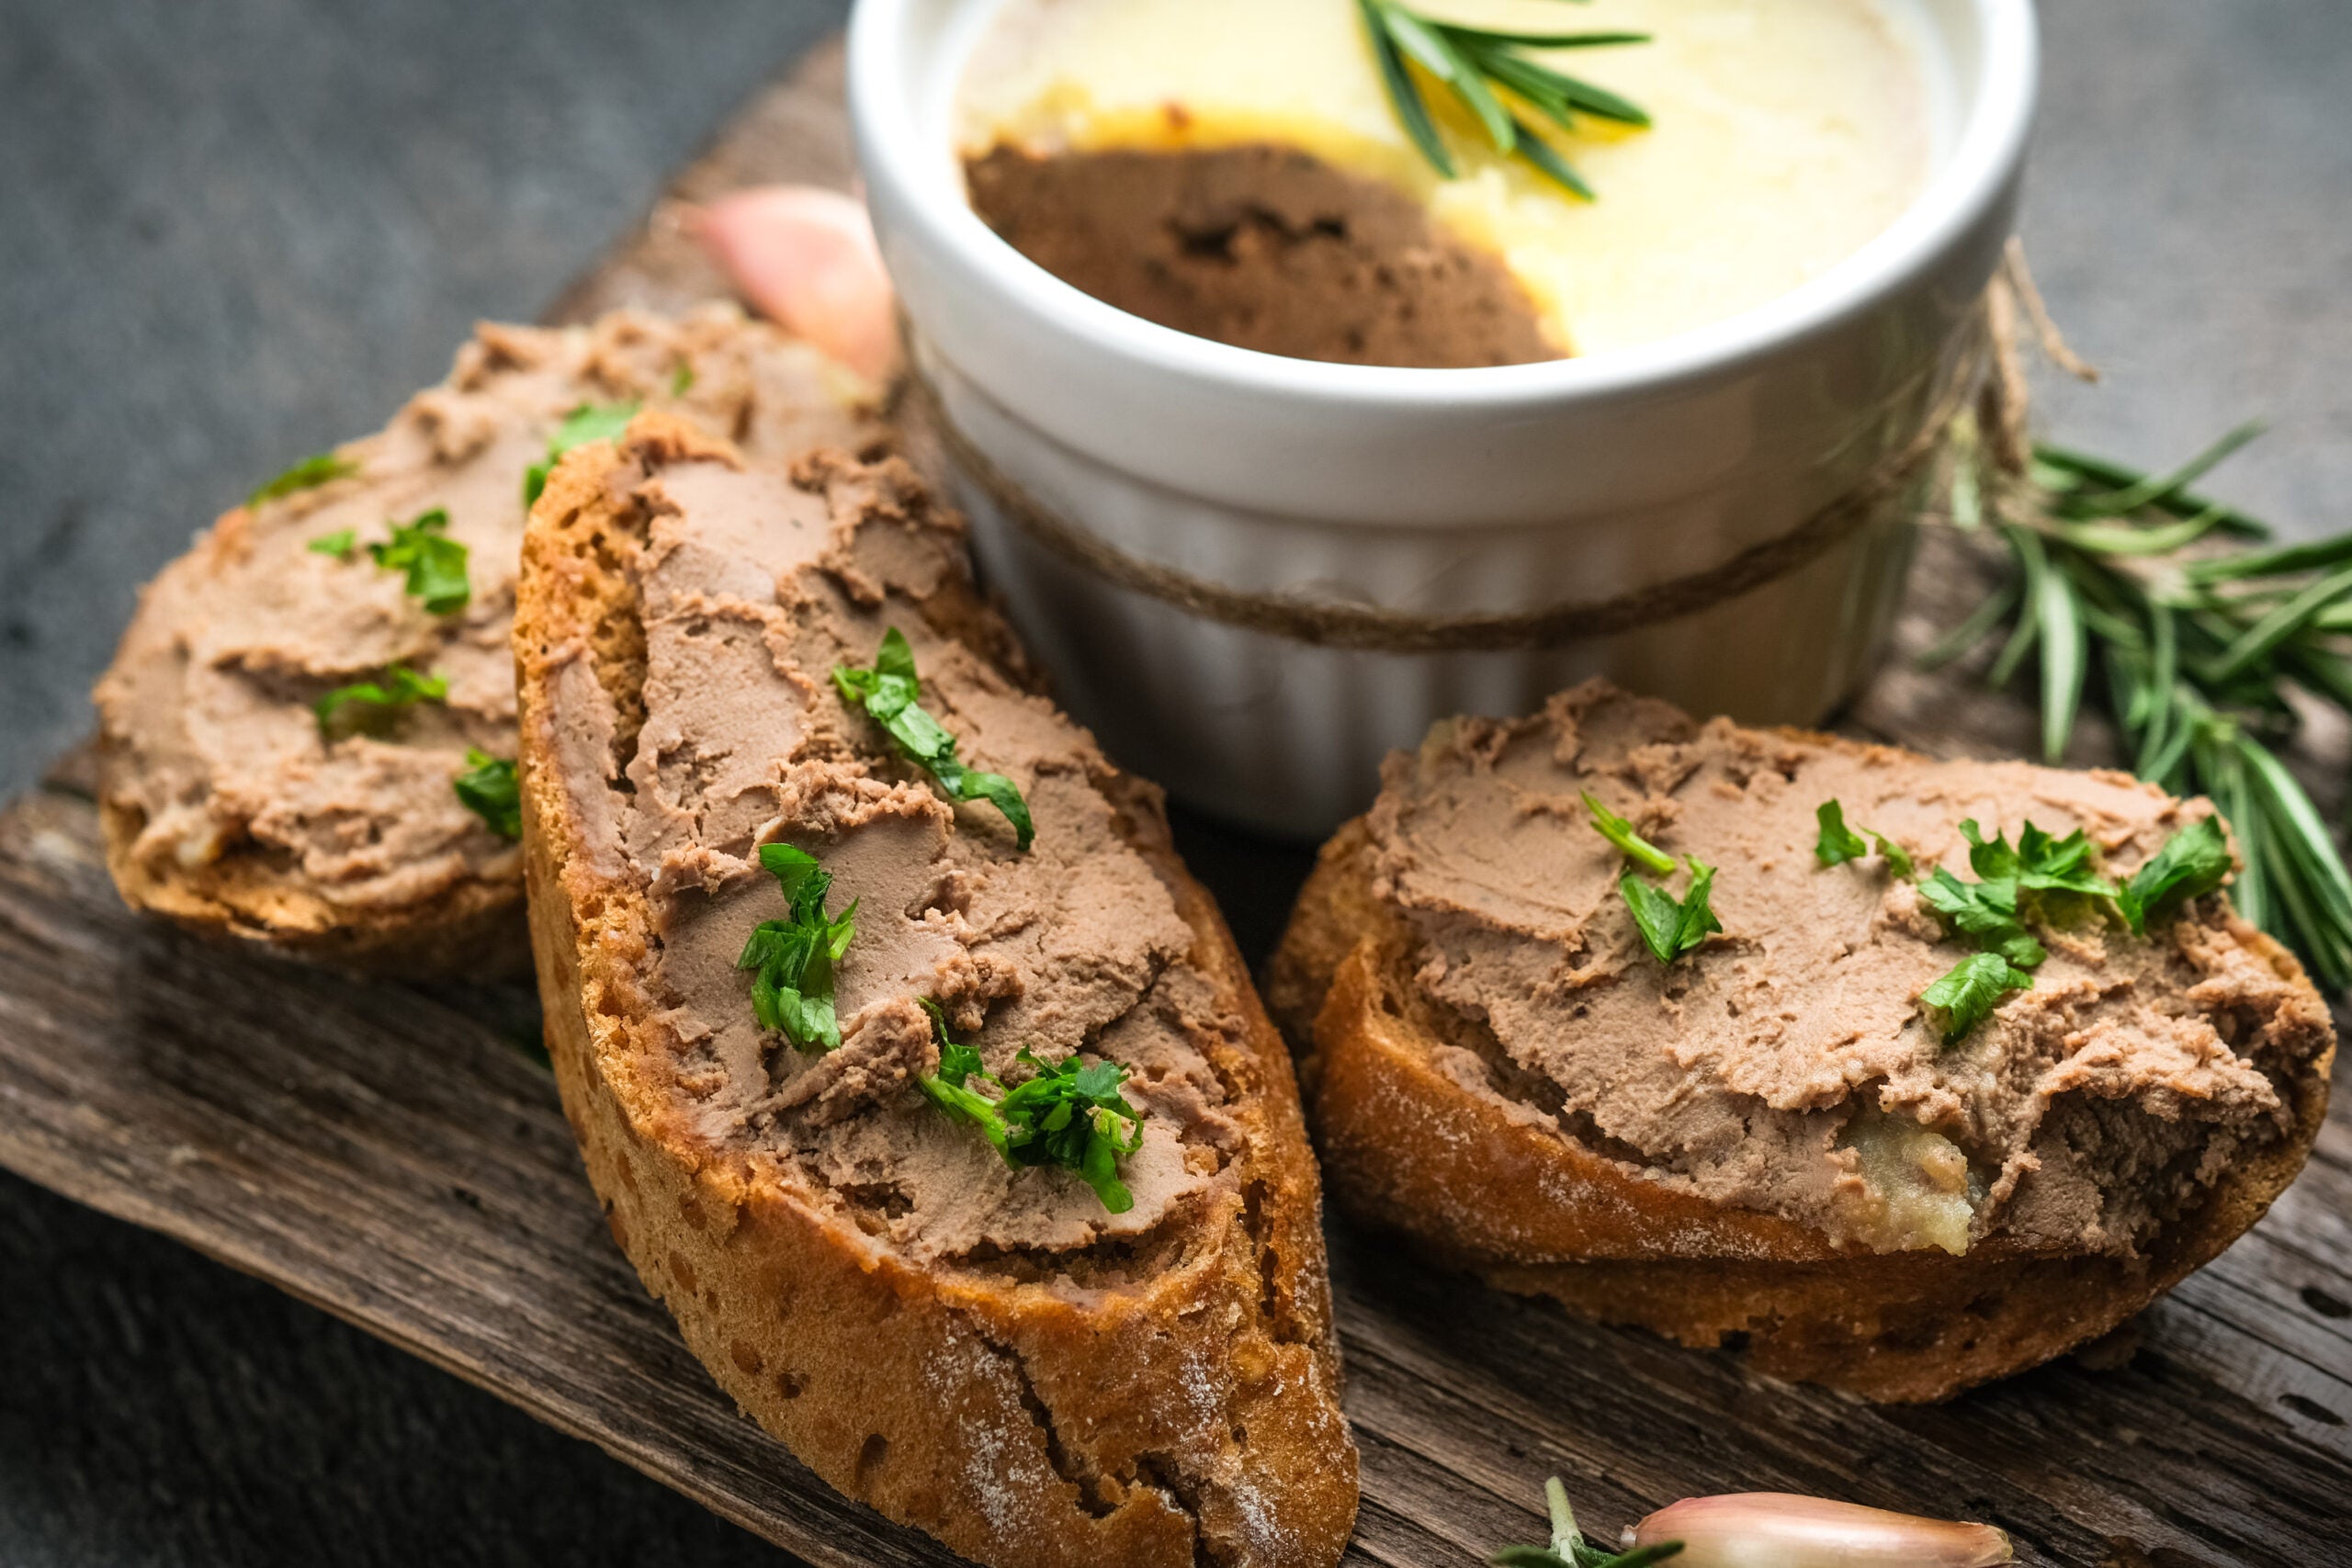 Homemade liver pate on toast served on a cutting board